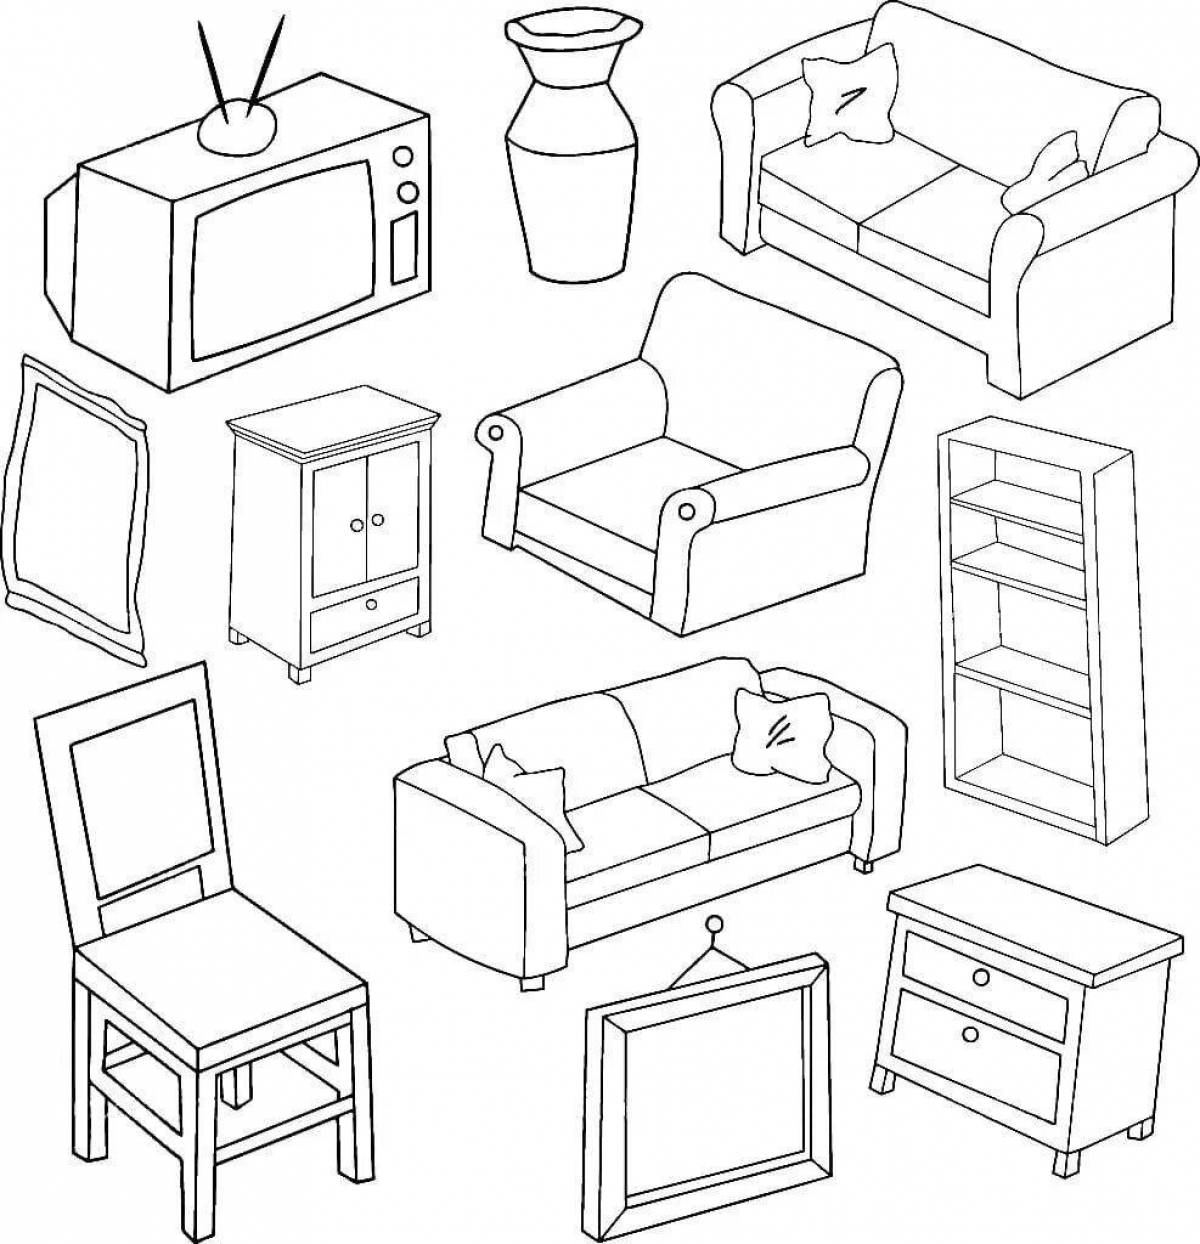 Lovely coloring house furniture ami